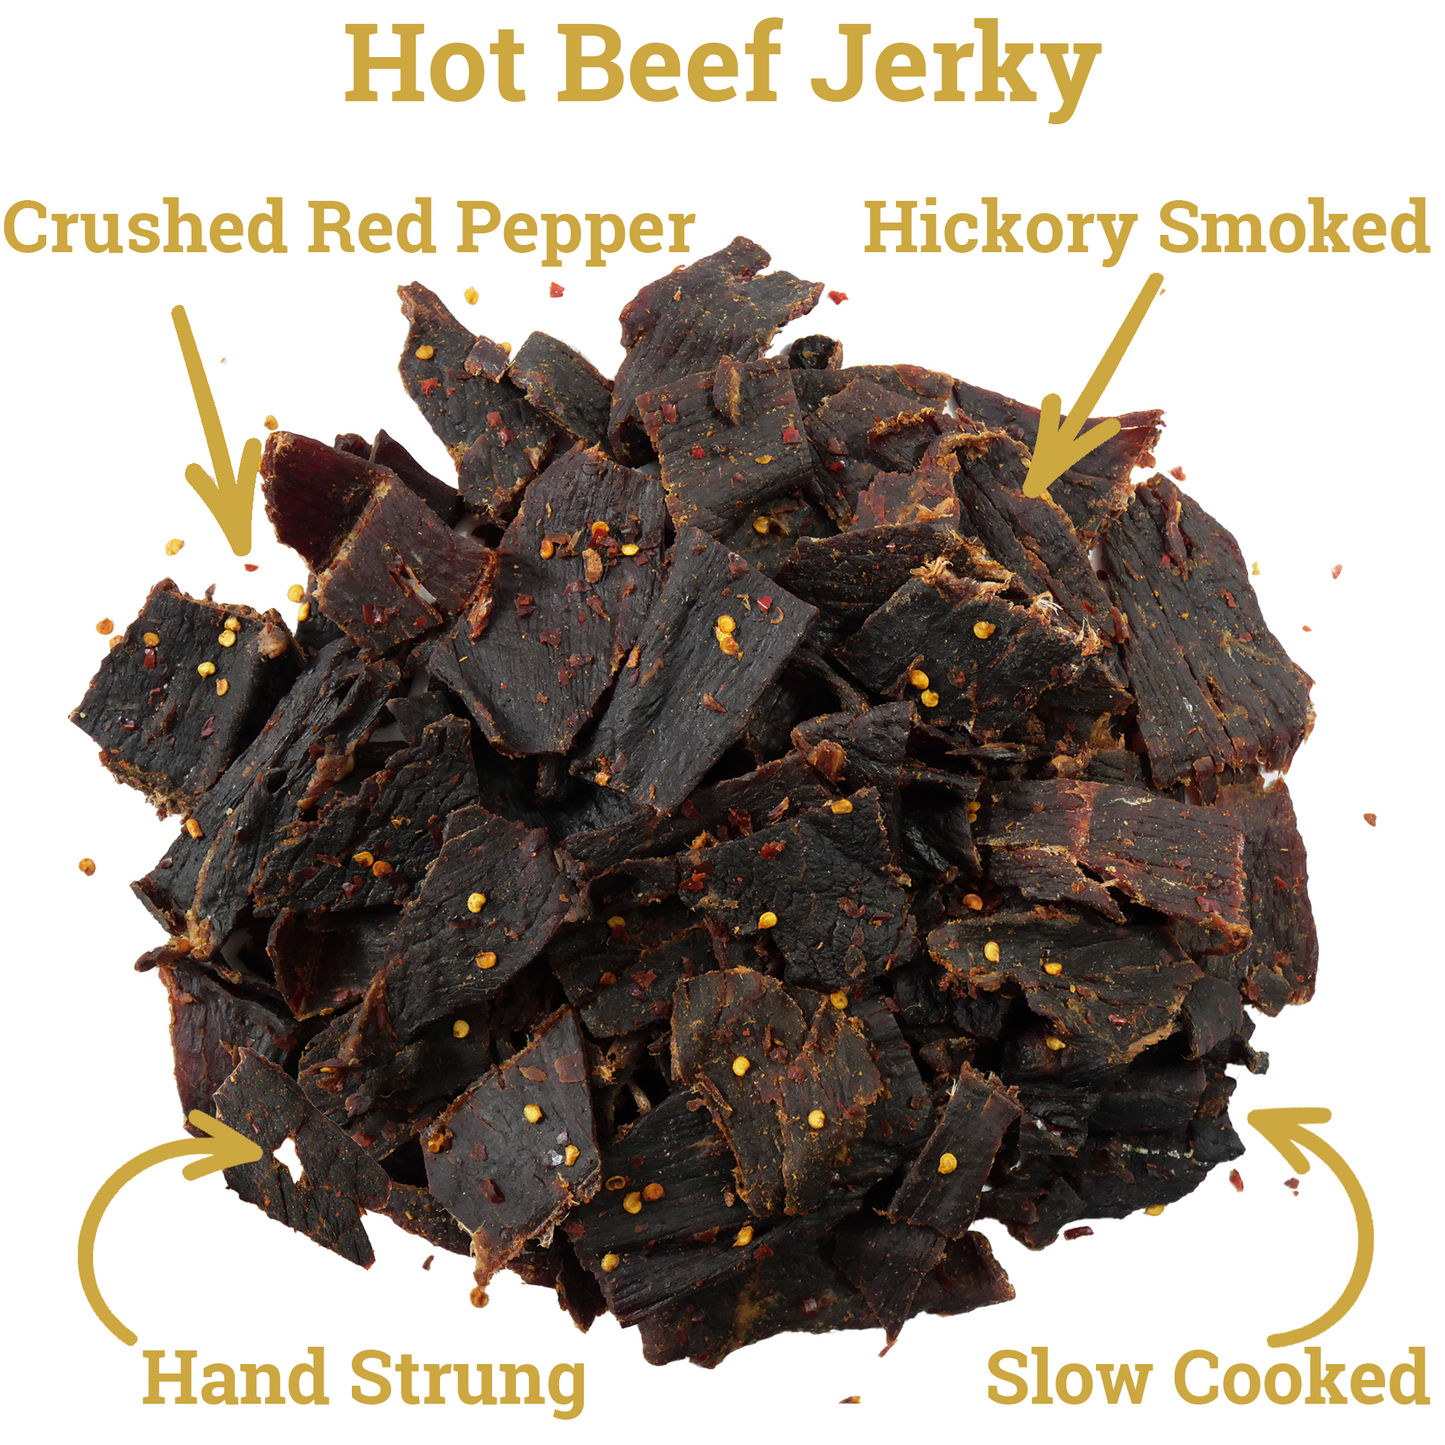 Lone Star Hot Beef Jerky - 1 Pound Resealable Bag - Fiery Handcrafted Flavor - Made in the USA